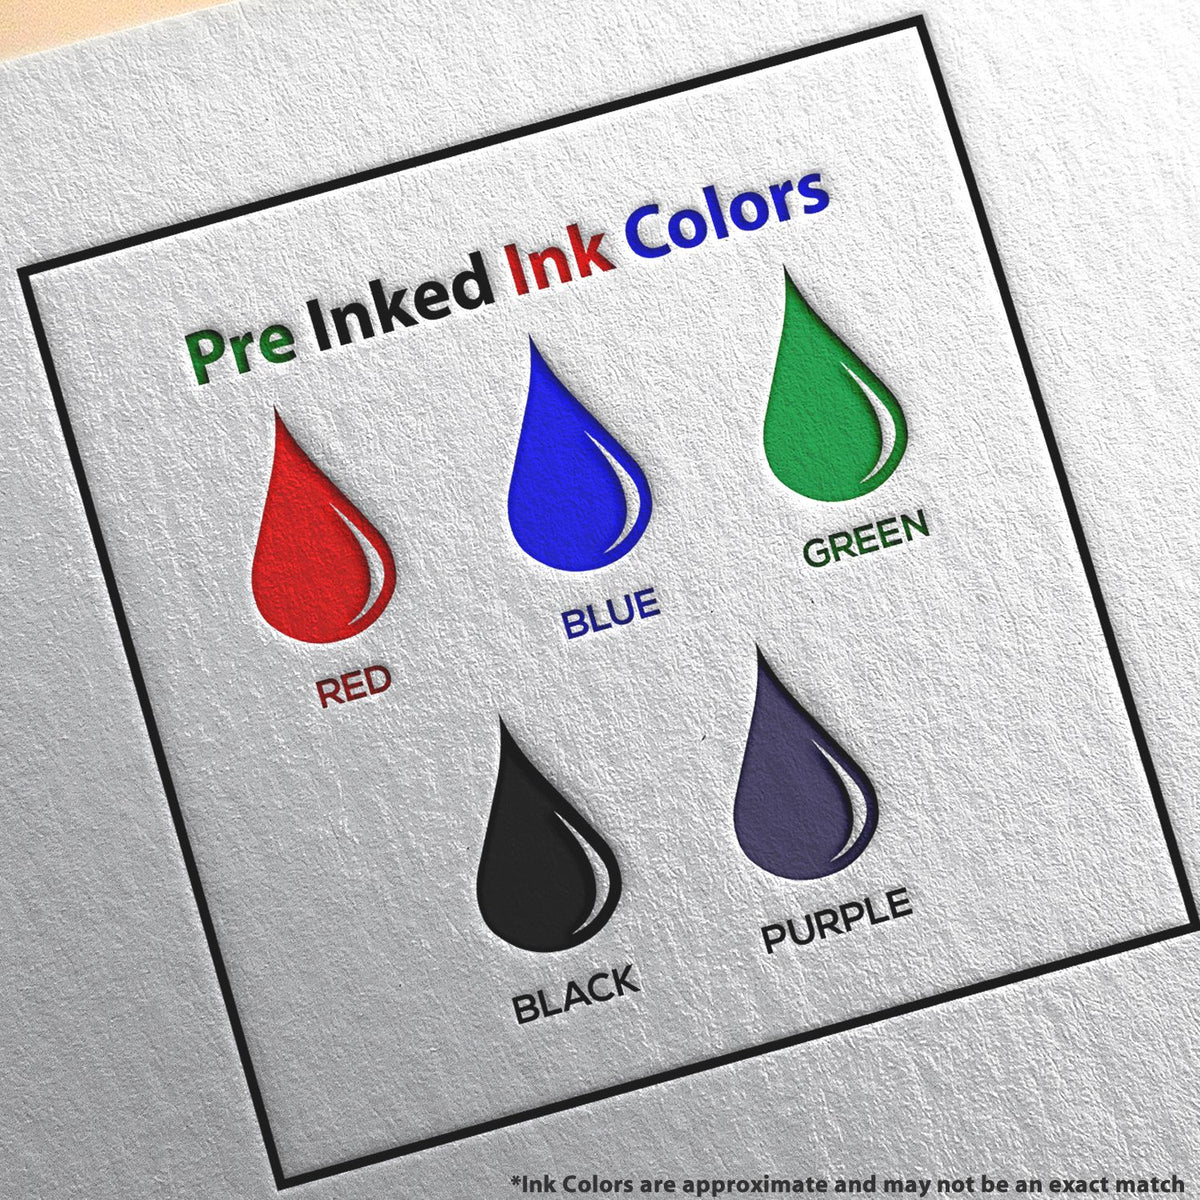 A picture showing the different ink colors or hues available for the Premium MaxLight Pre-Inked Georgia Engineering Stamp product.